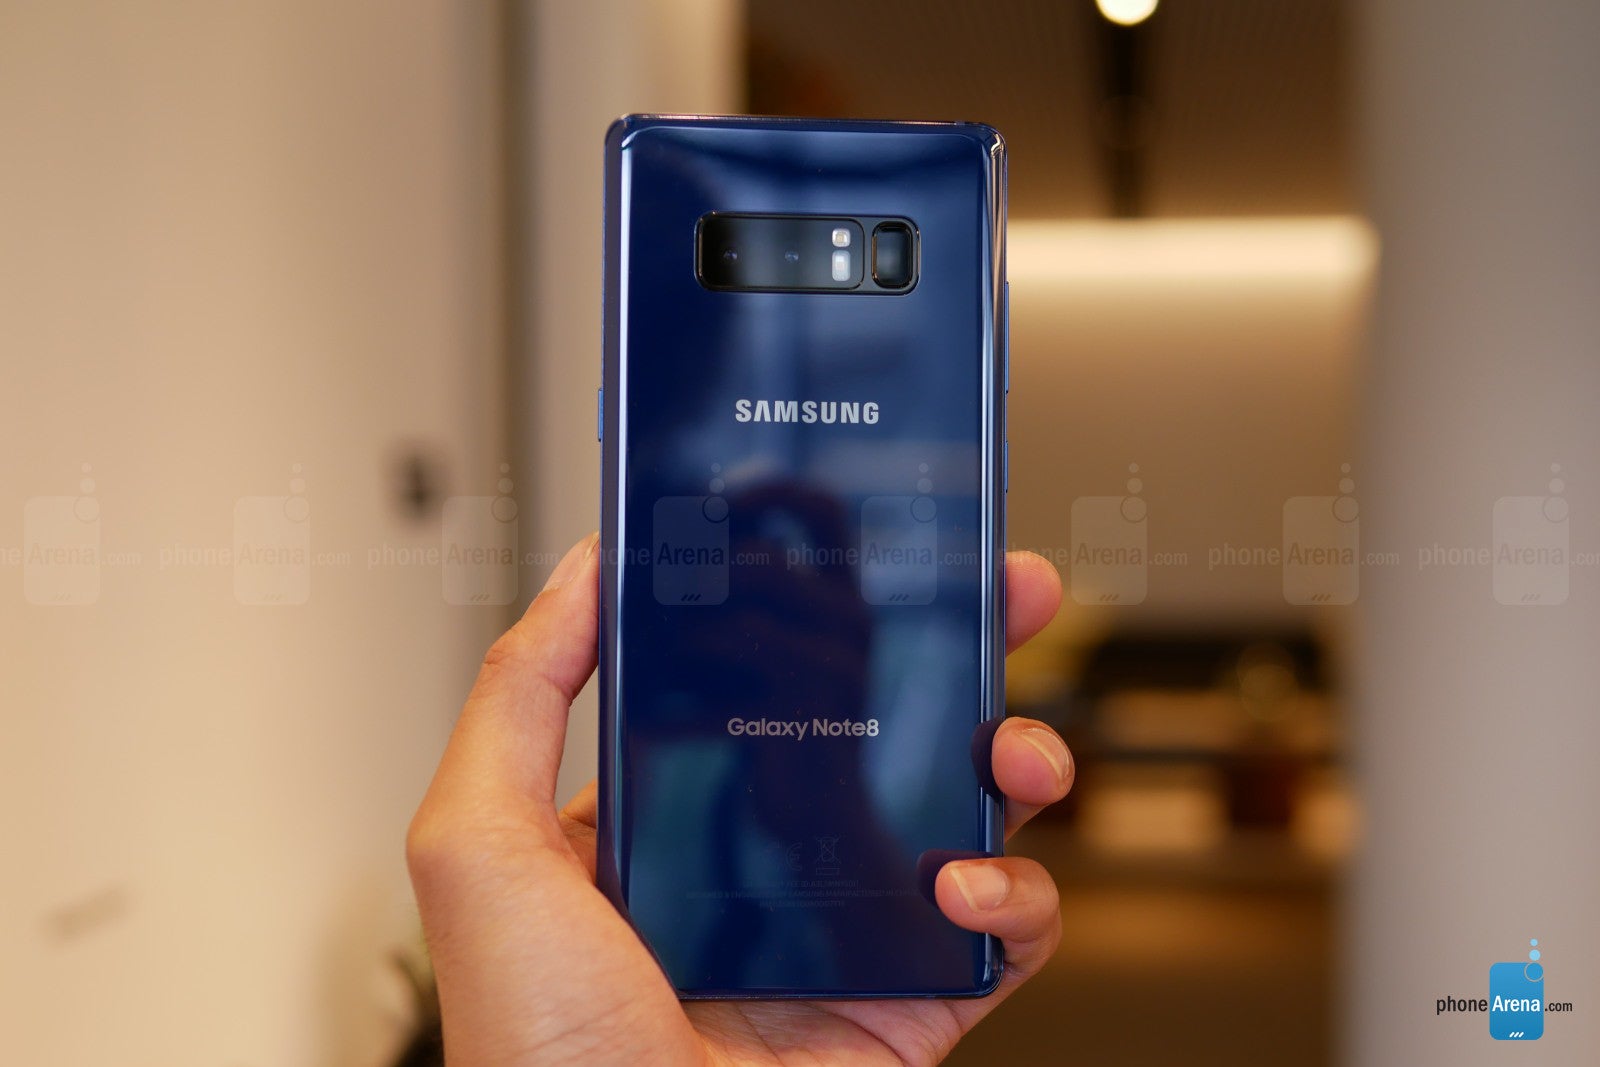 Should Samsung have put a wide-angle lens on the Galaxy Note 8?